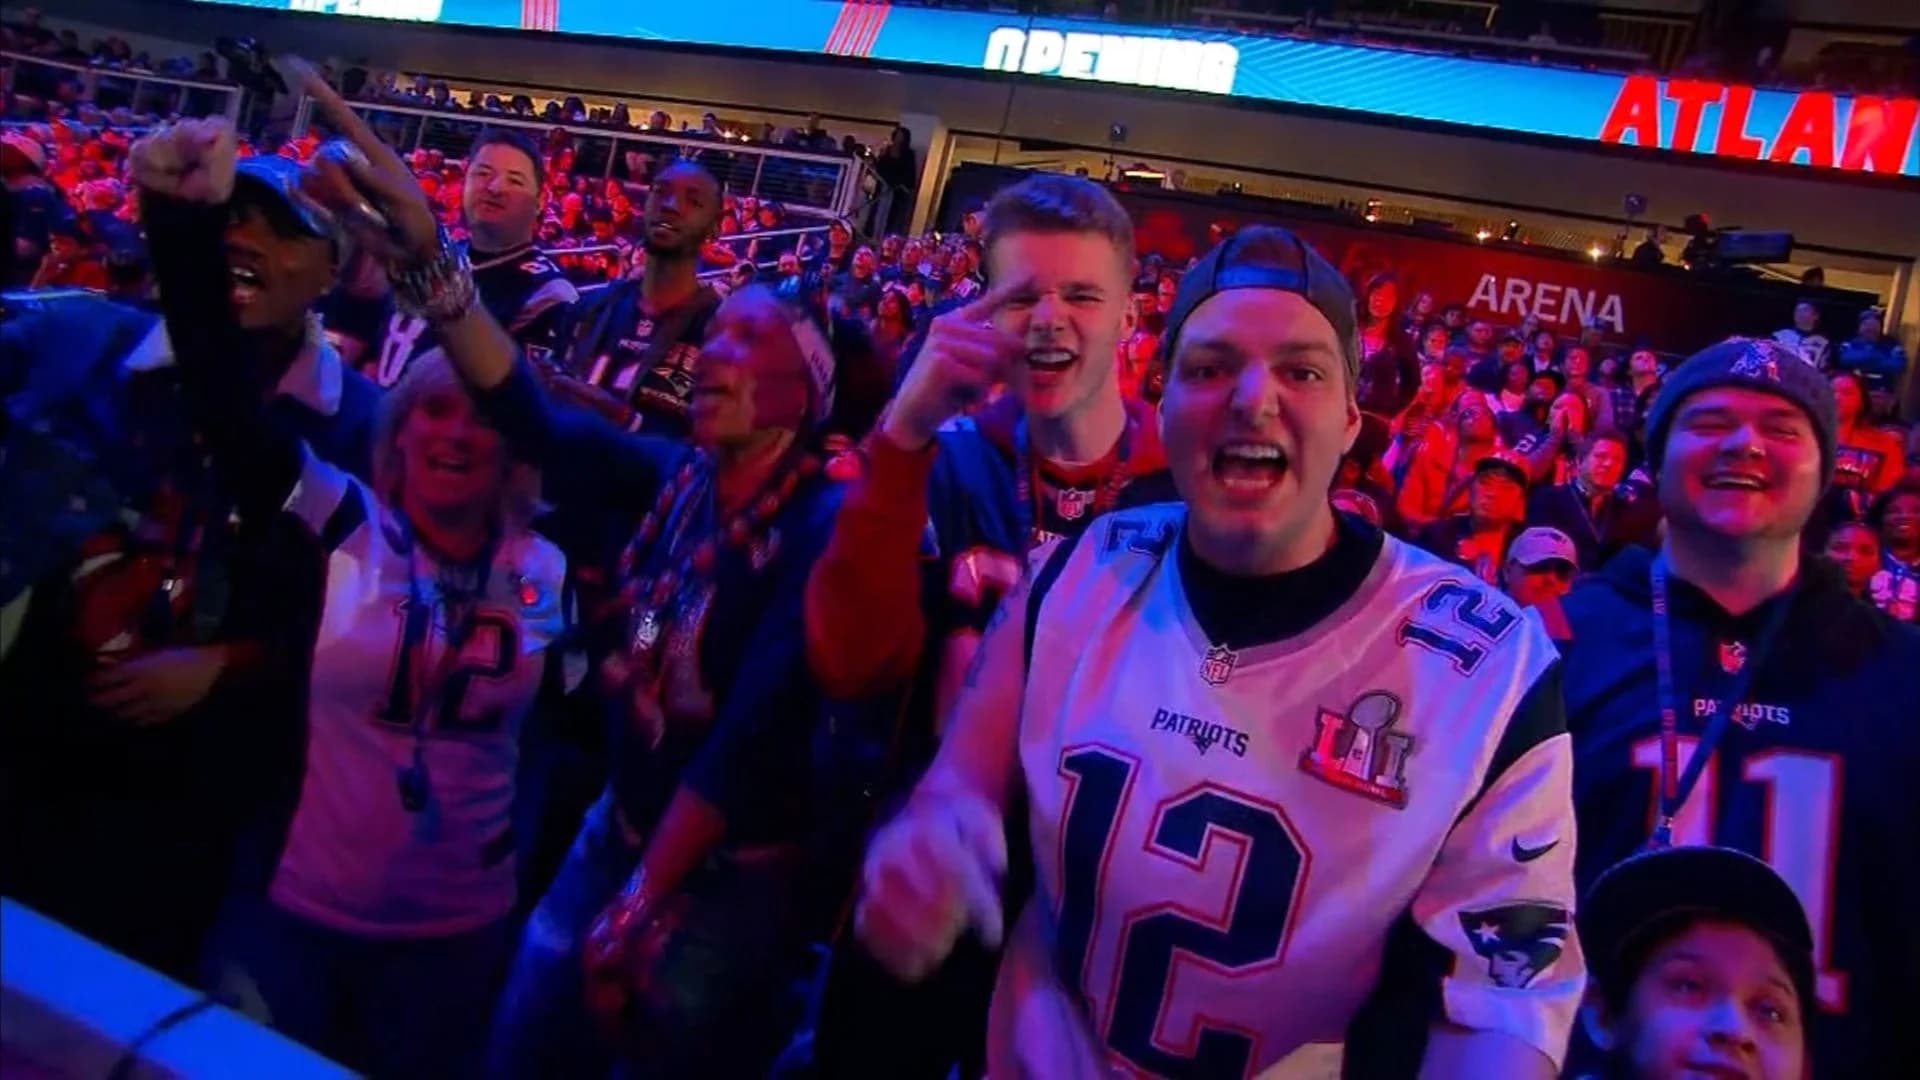 Study: Sports fans feel smarter, more attractive when their team wins